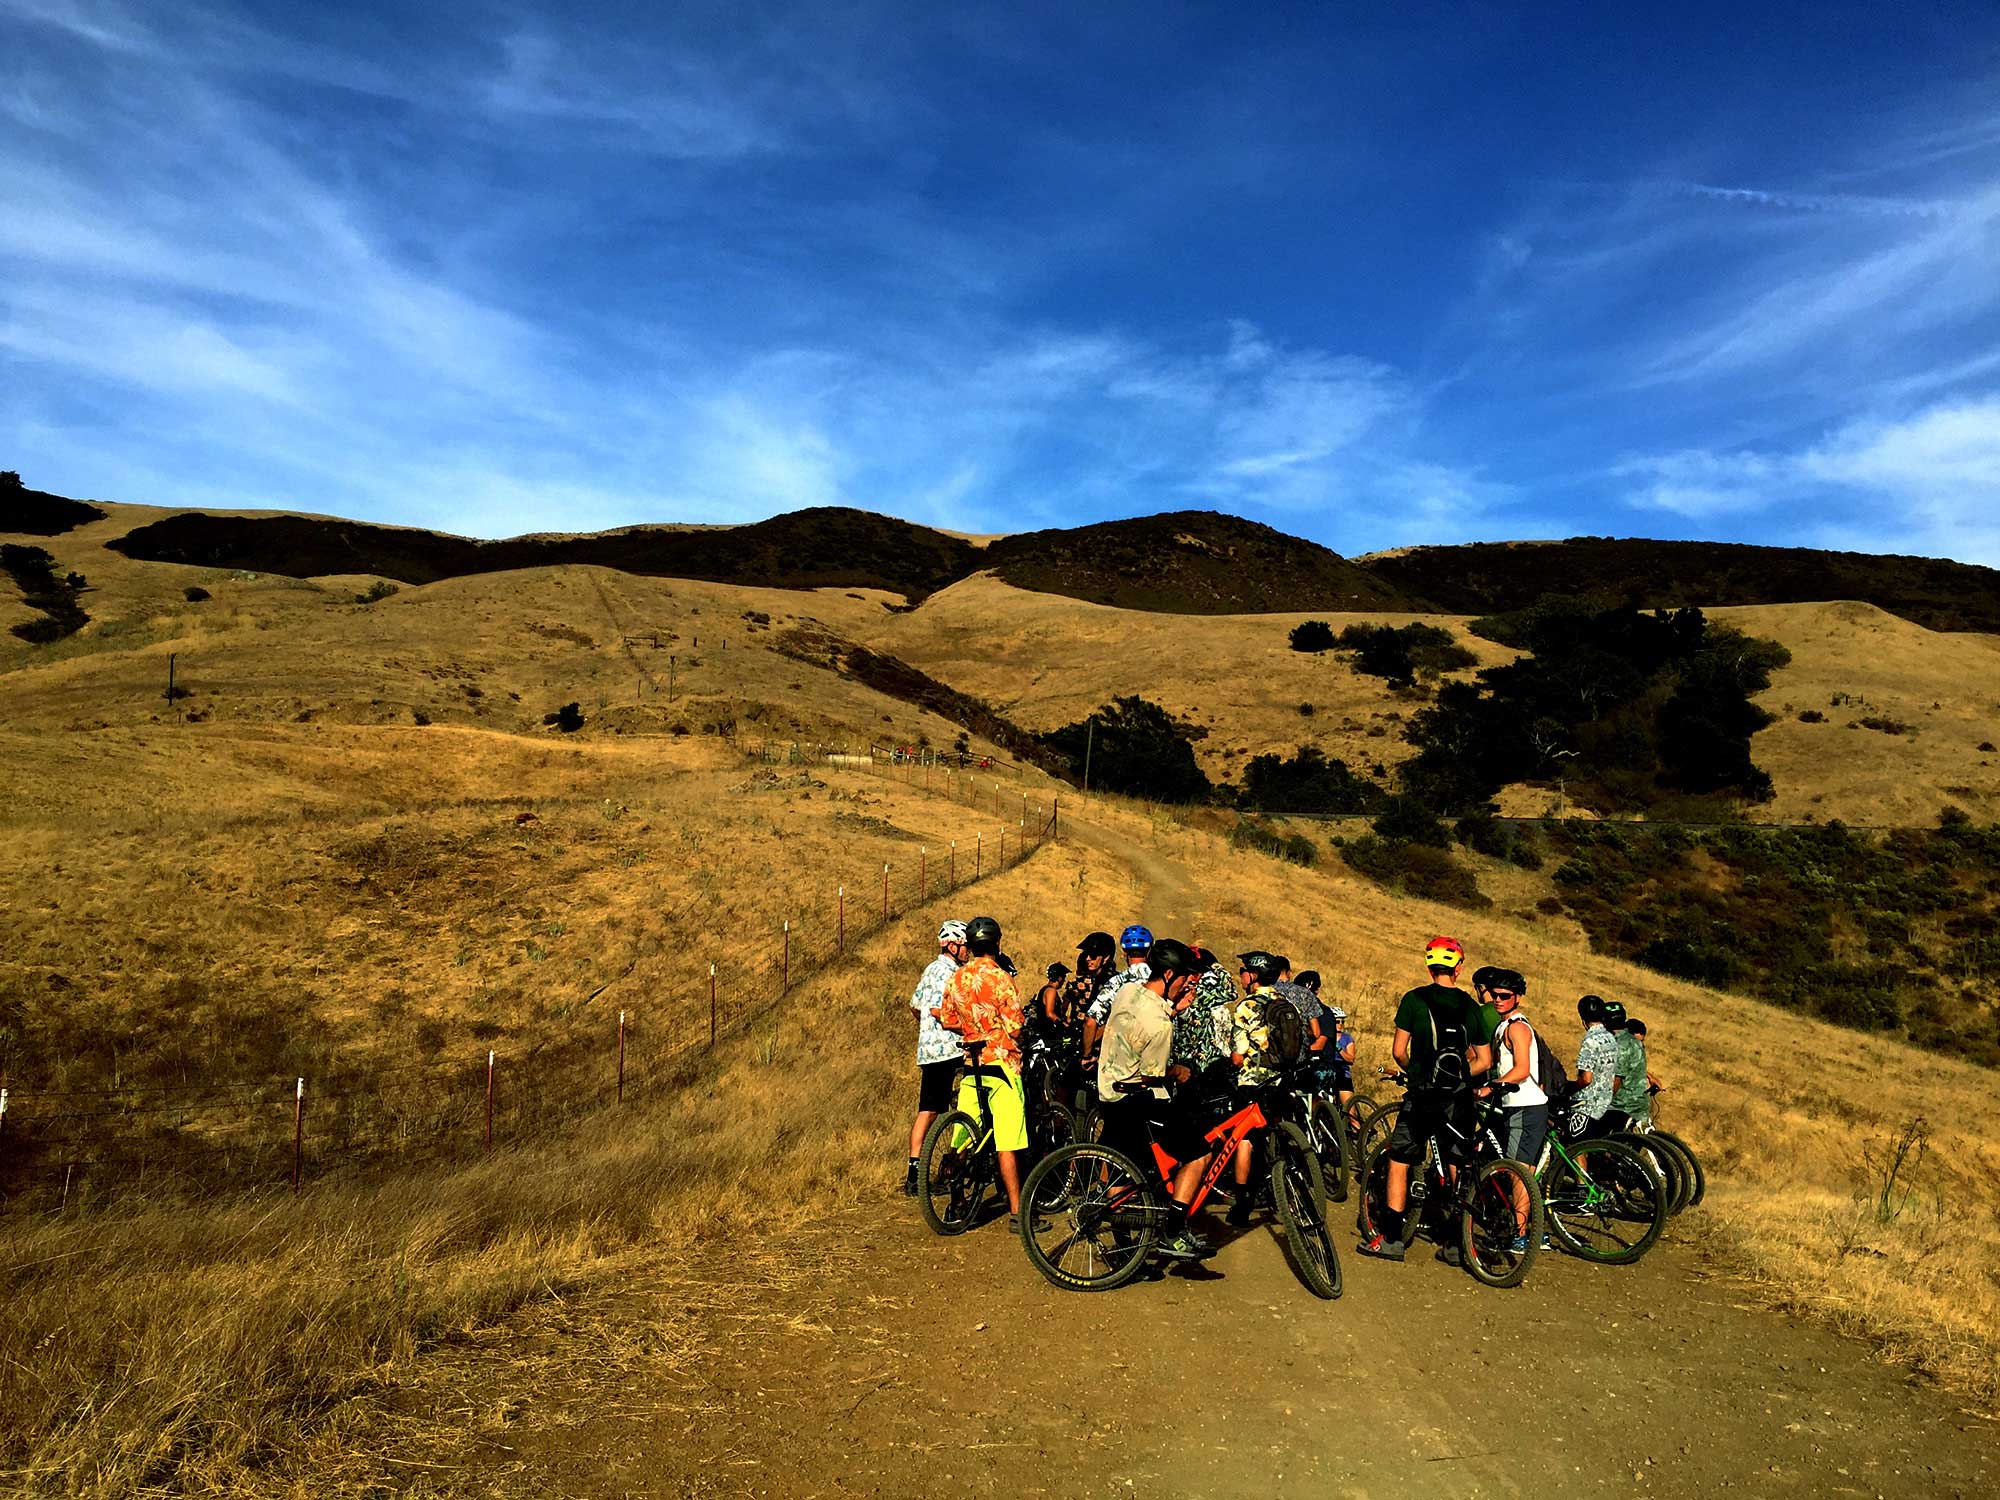 Oct. 7, 2016 – Before colliding with an active set of railroad tracks on West Cuesta Ridge, Cal Poly Cycling mountain bikers regroup with their compatriots. On this particular day, 38 team members joined the movement, all clad in Hawaiian shirts.